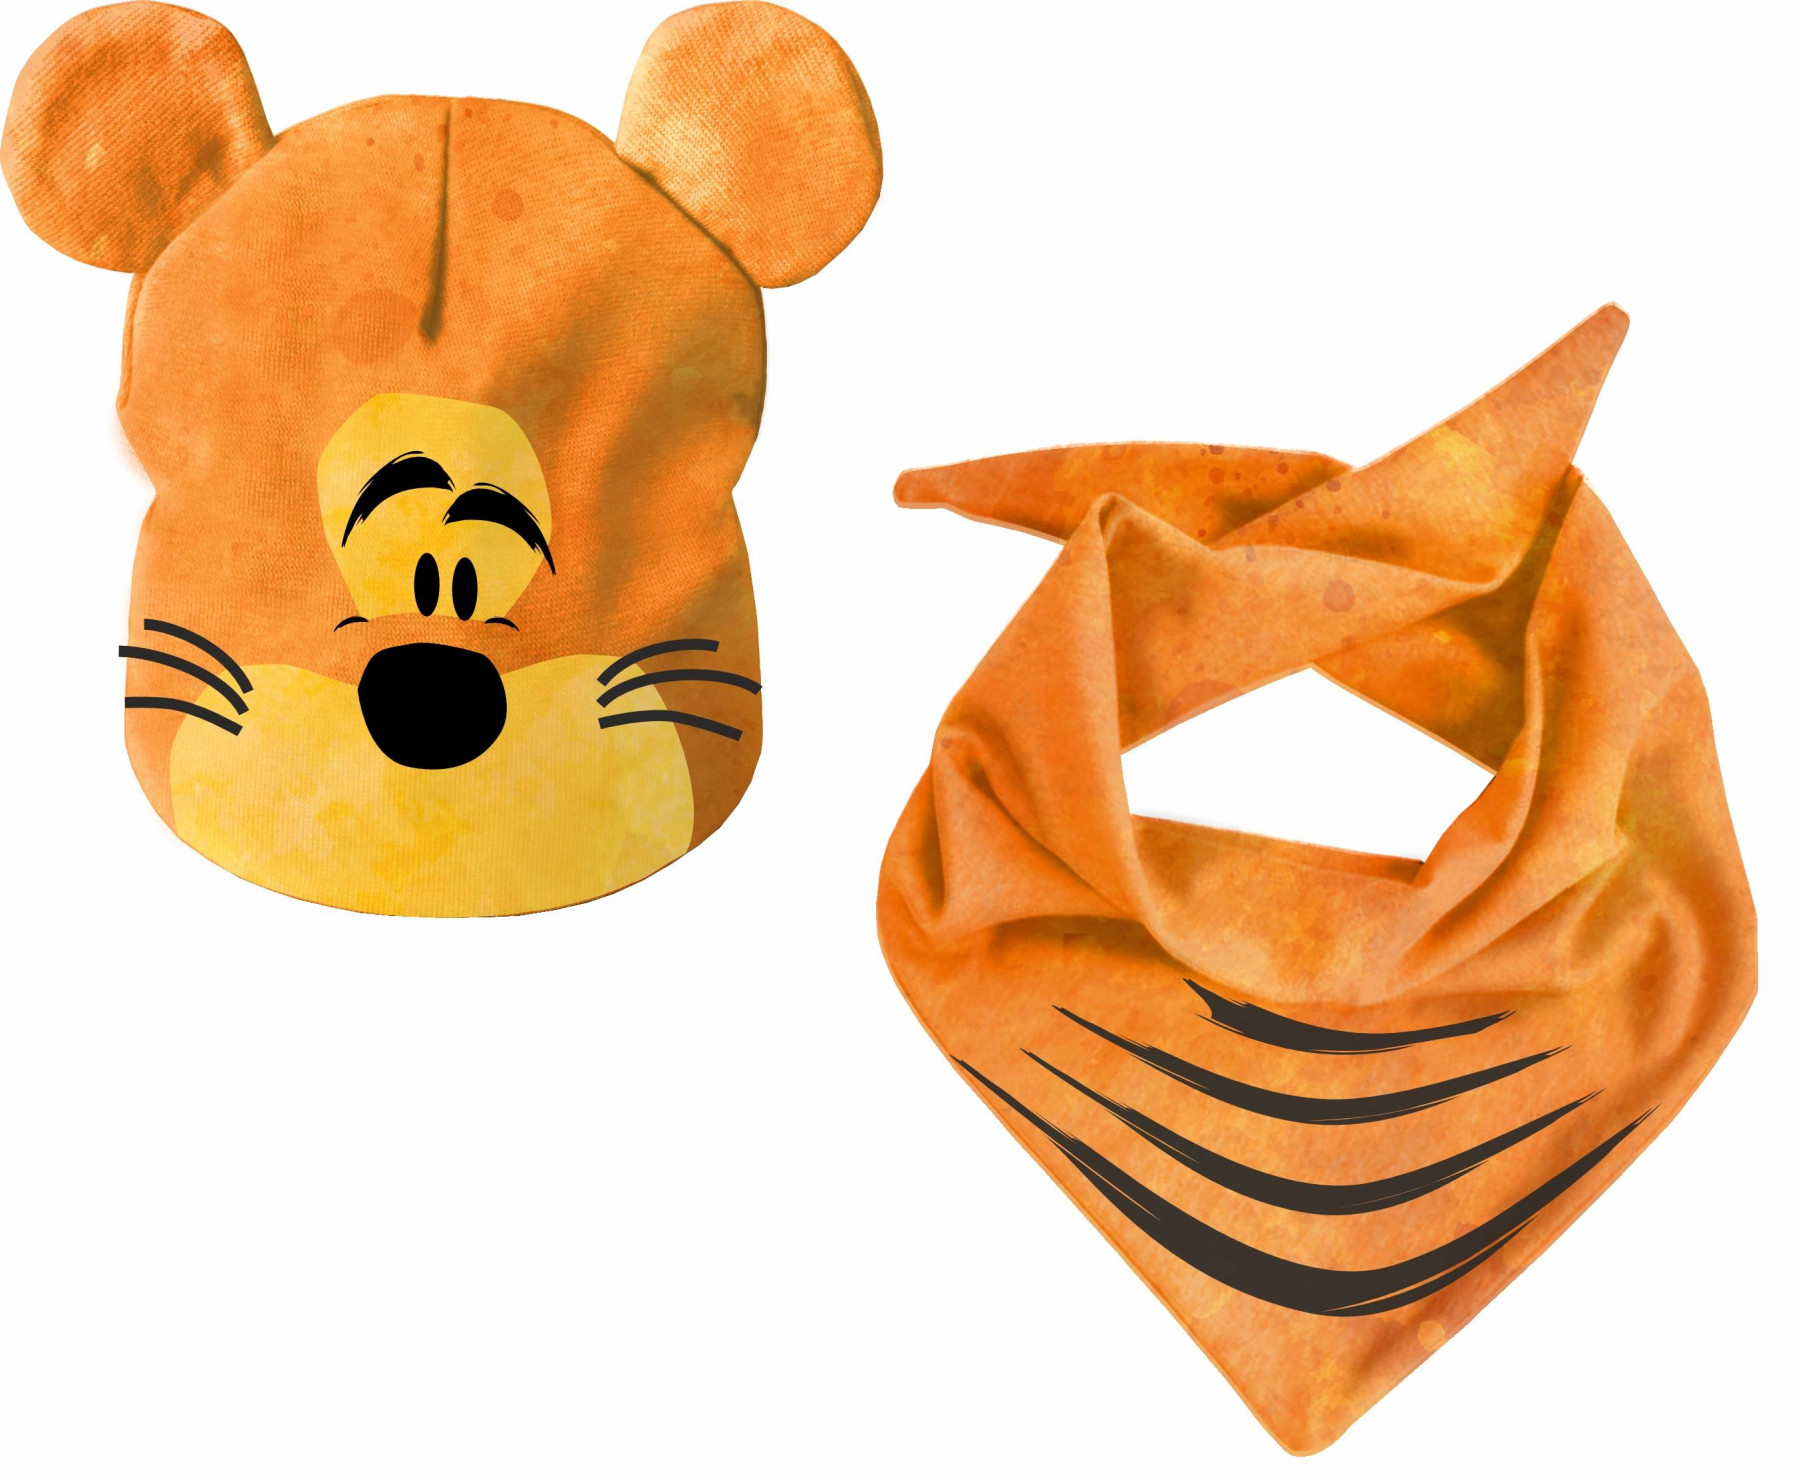 KID'S CAP AND SCARF (TEDDY) - TIGER - sewing set